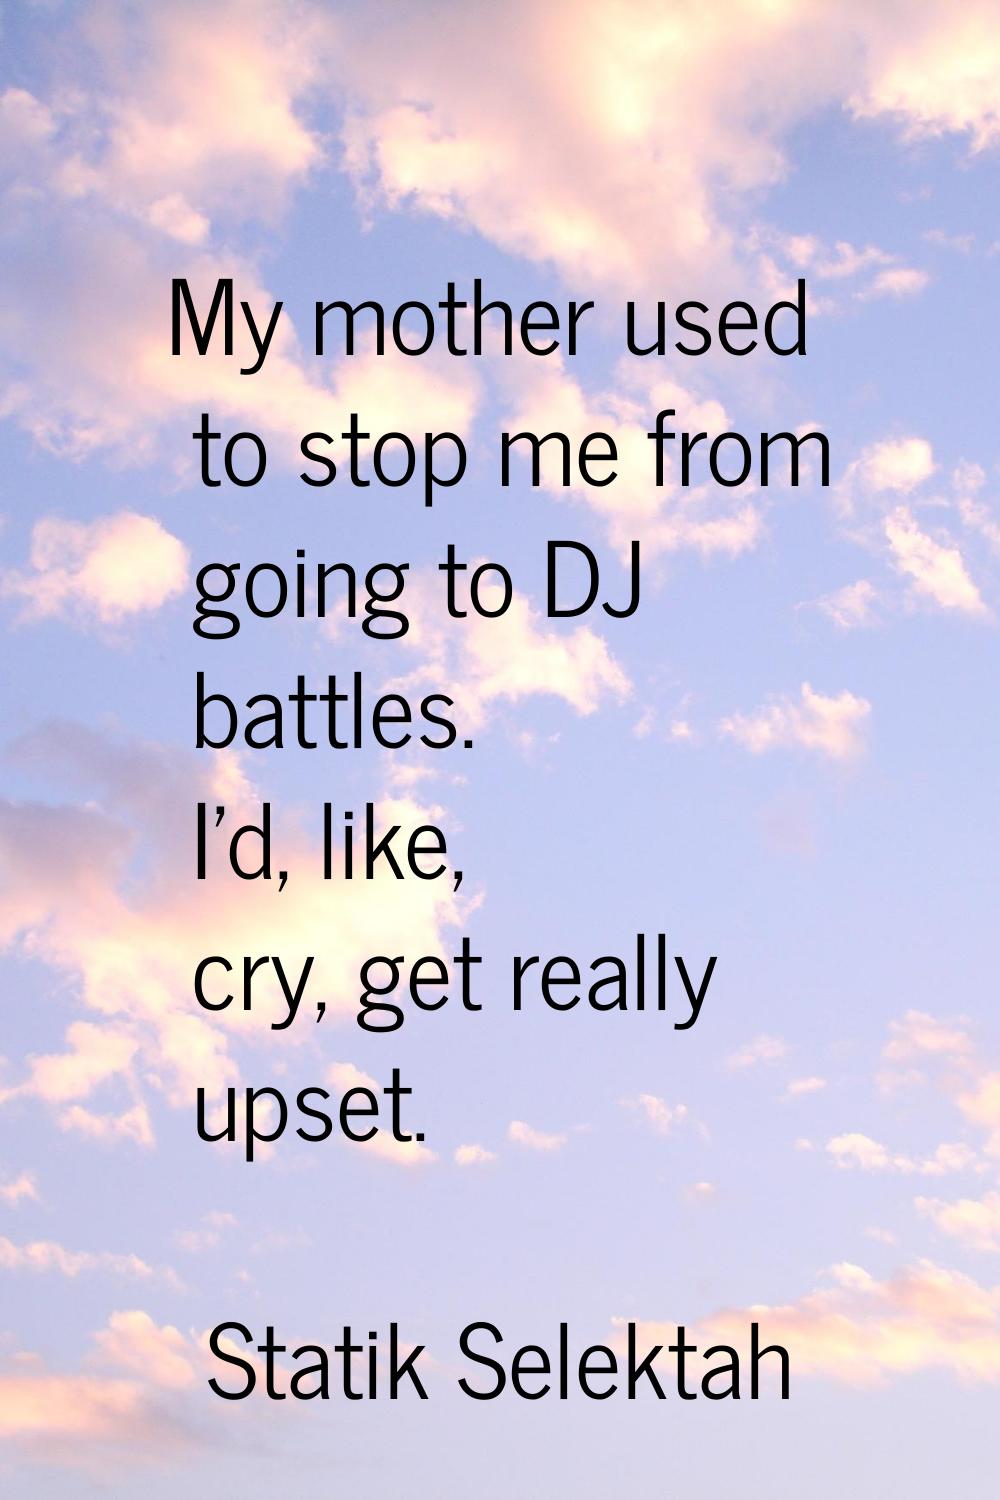 My mother used to stop me from going to DJ battles. I'd, like, cry, get really upset.